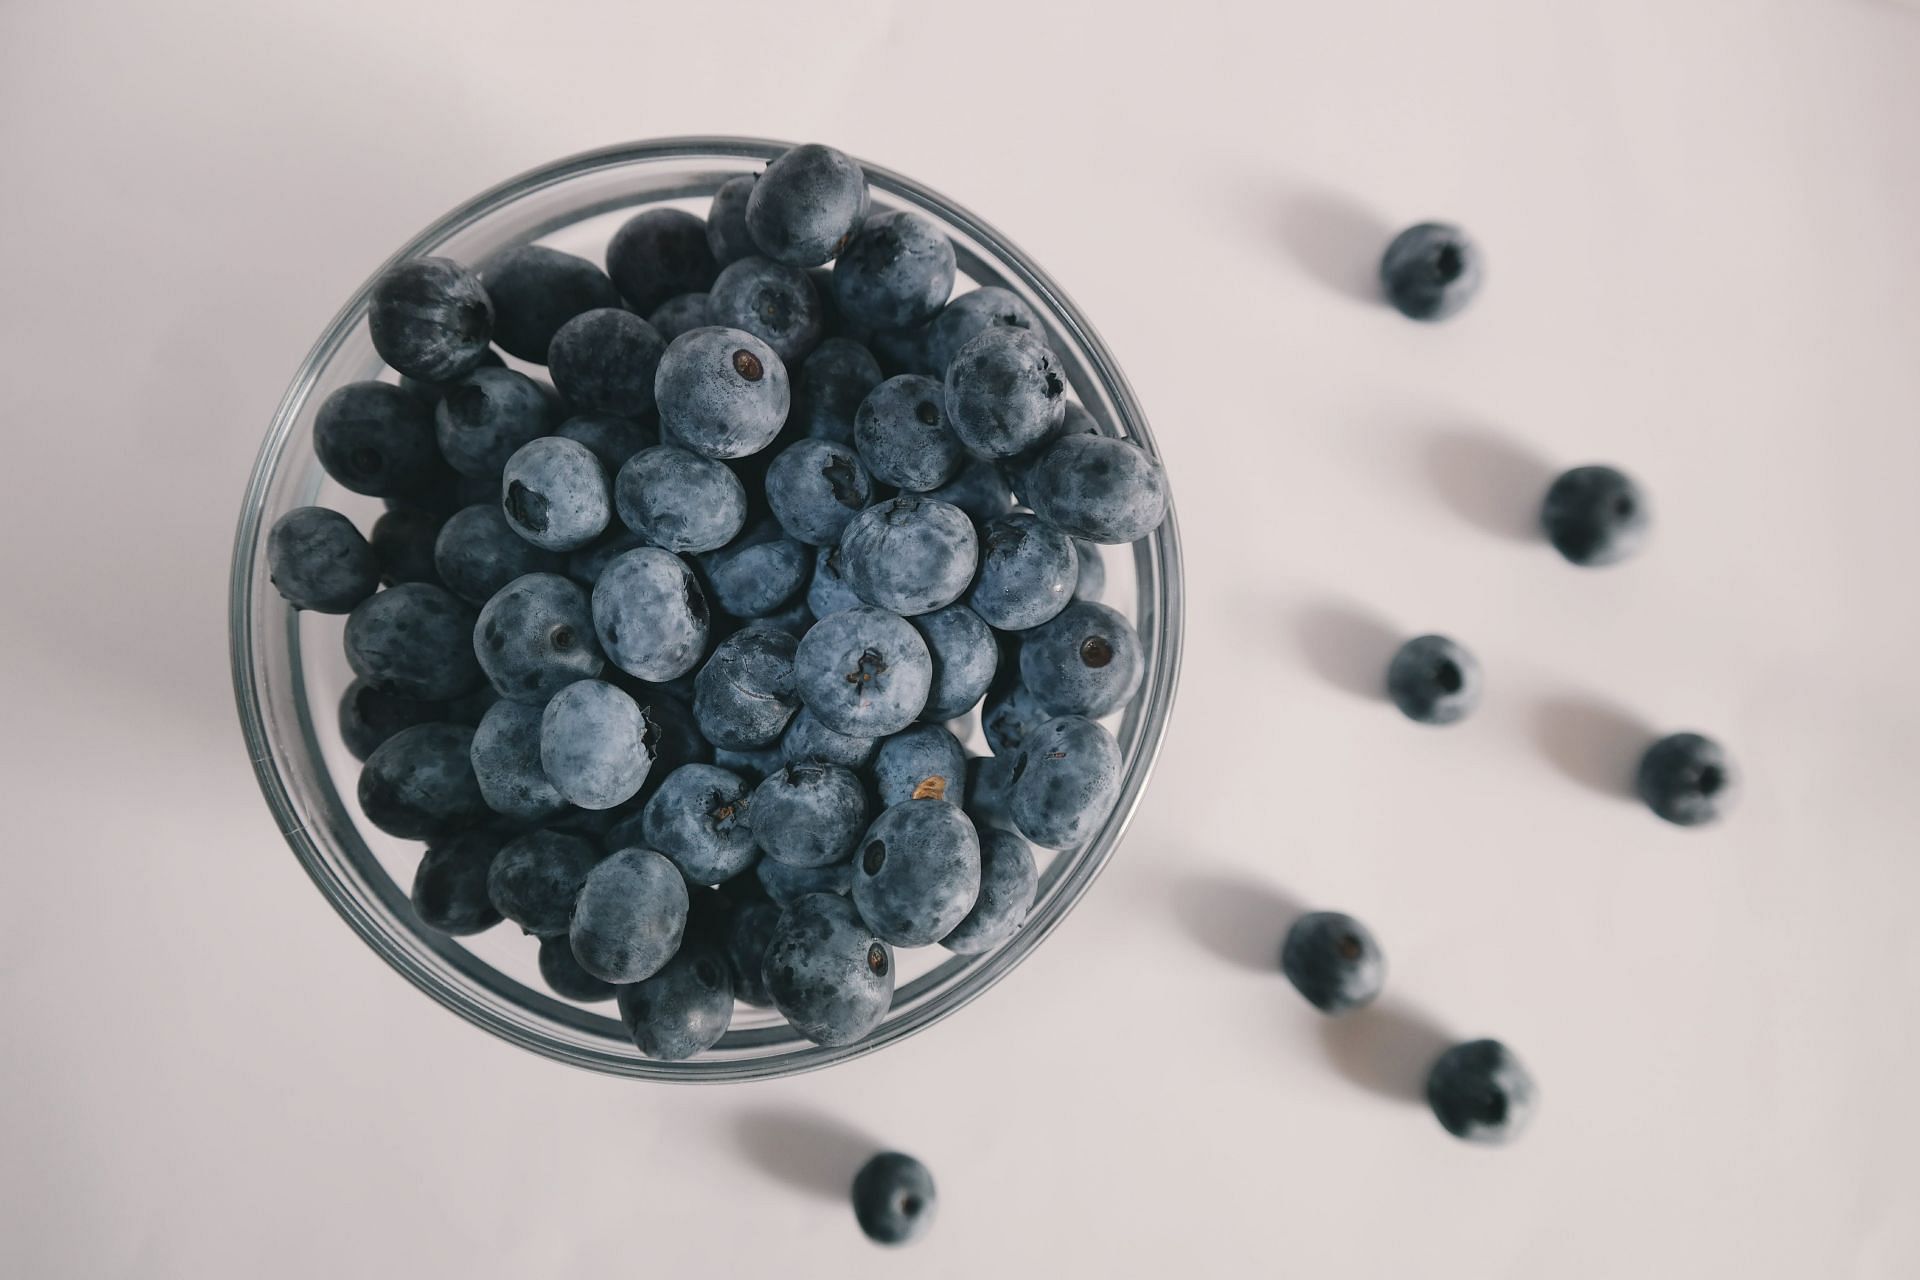 Importance of fruits as foods that increase blood in the body (image sourced via Pexels / Photo by Brugitte)